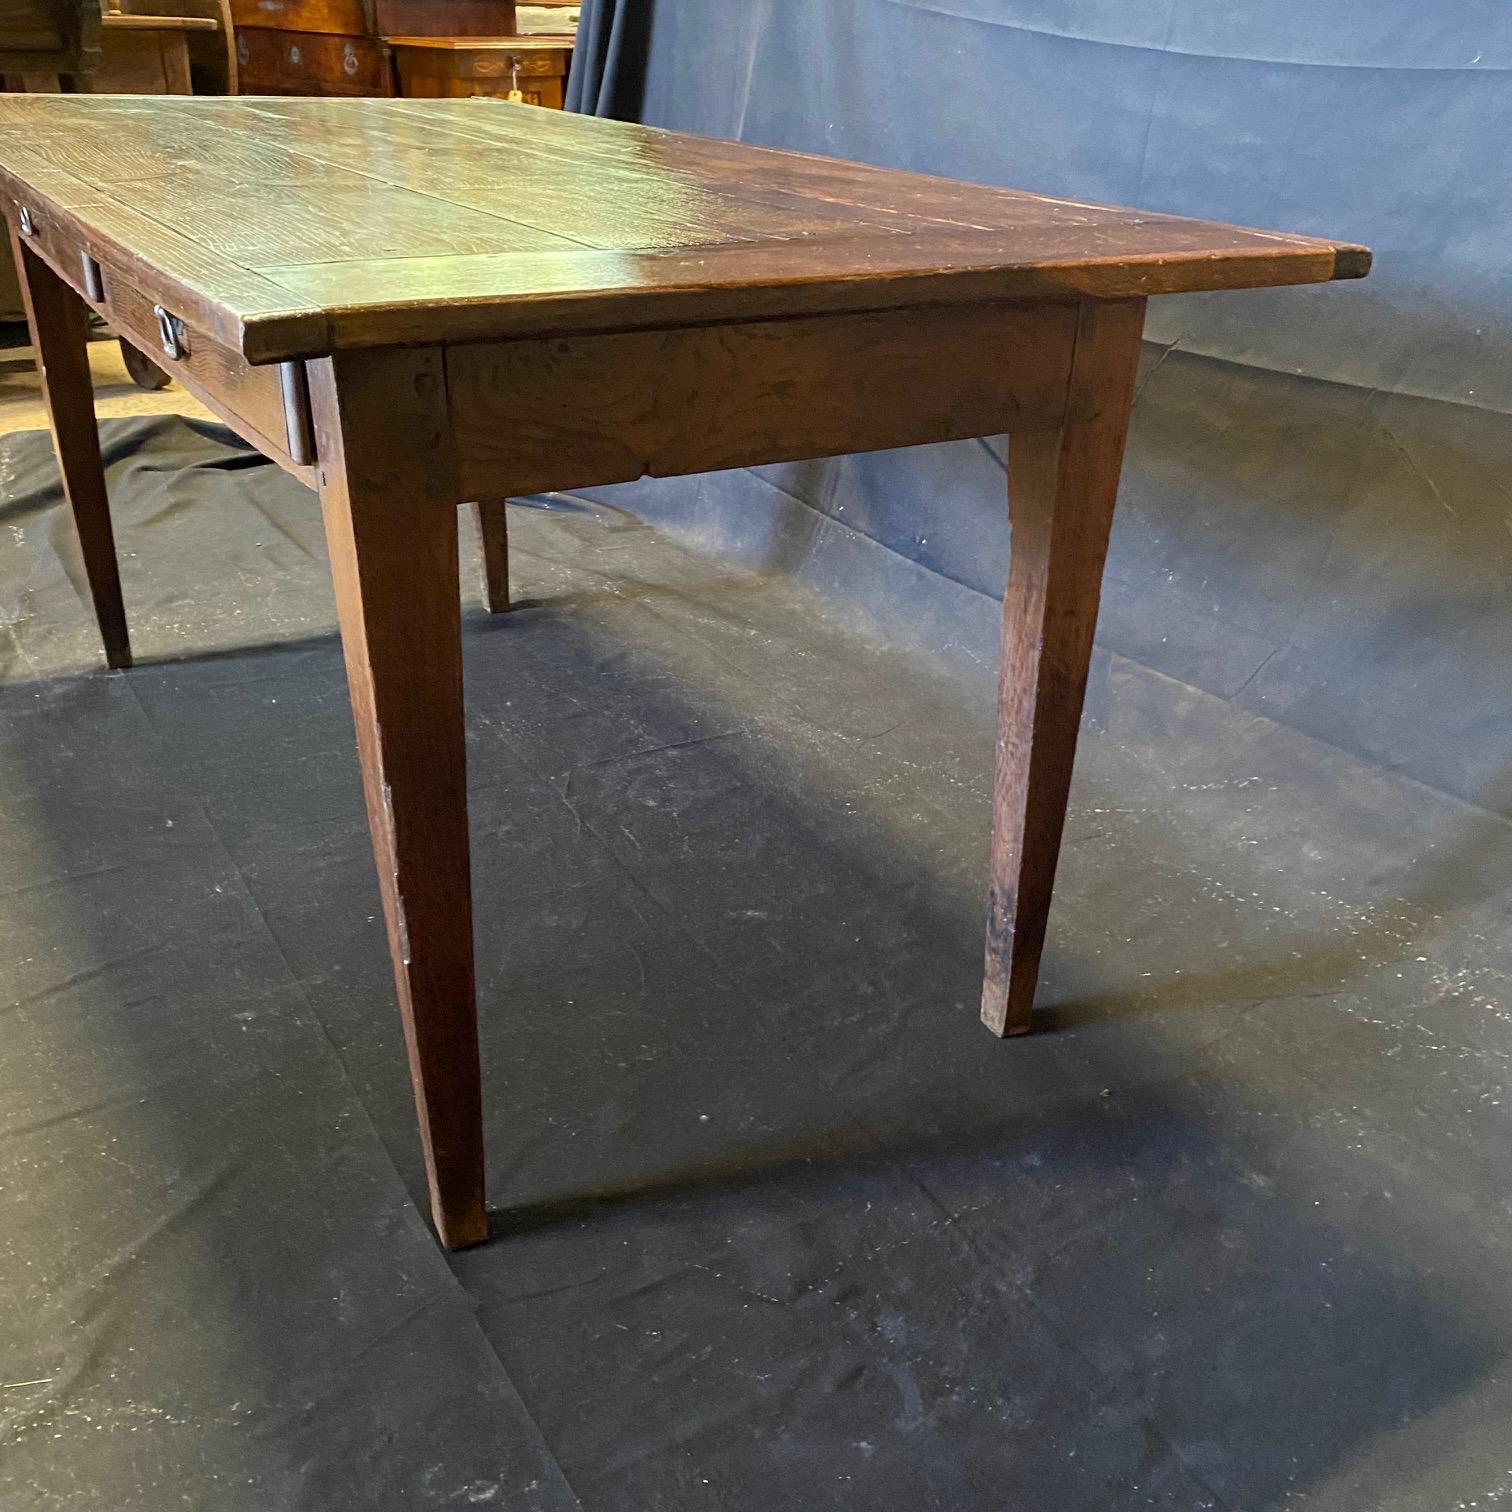 Lovely Provencal French oak dining table from the 19th century bought in the south of France. Beautiful patina and great flexible size. Two spacious drawers. Lovely tapered square carved legs means that chairs slide easily under the table. Perfect